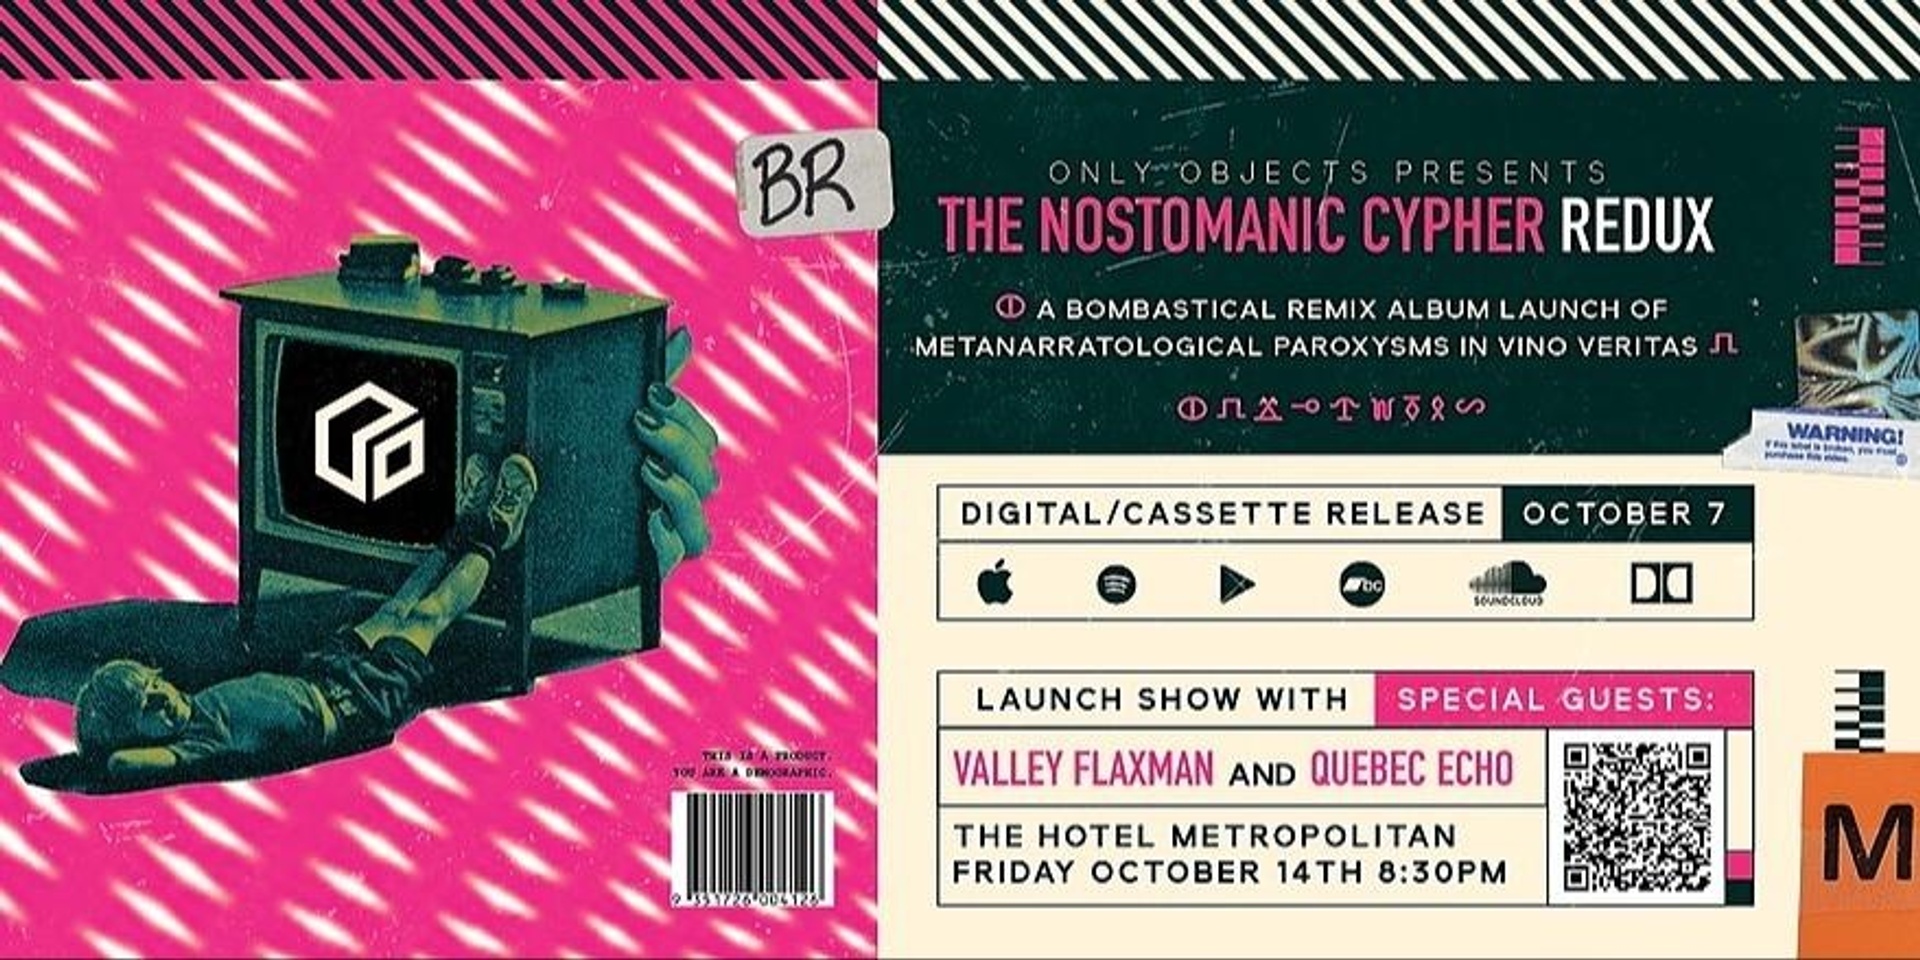 Only Objects' 'The Nostomanic Cypher Redux' Launch, with special guests Valley Flaxman and Quebec Echo